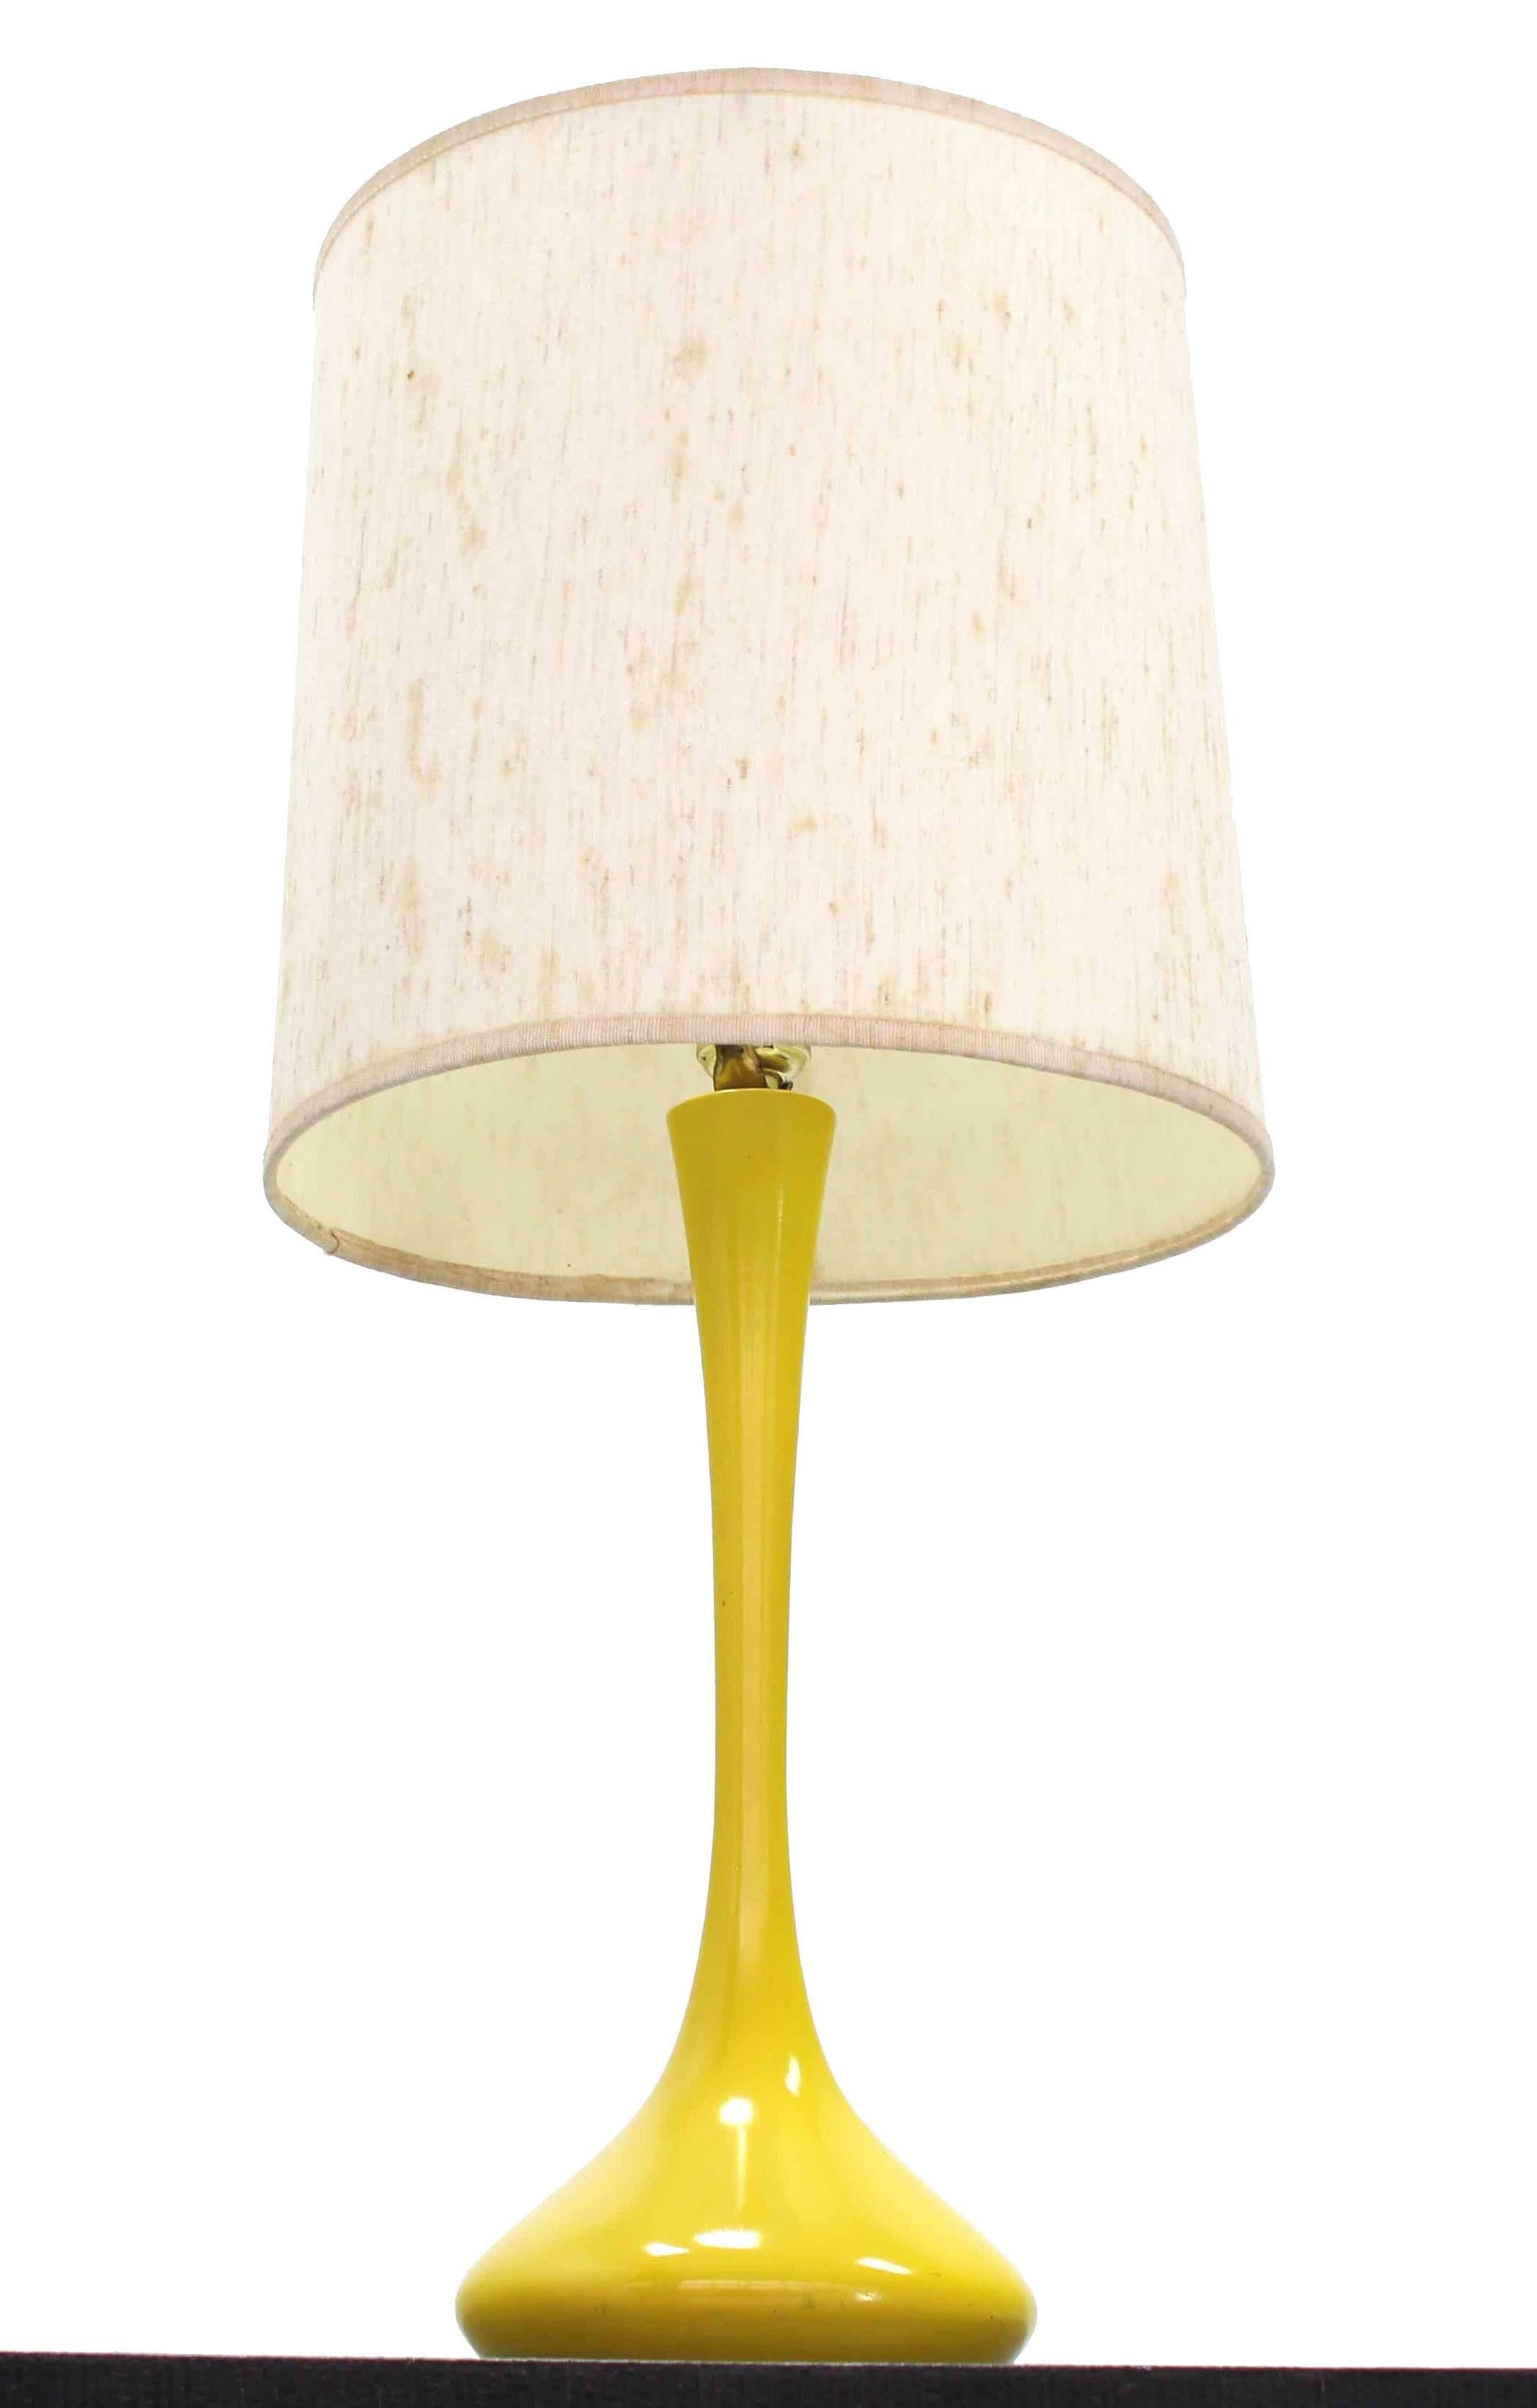 American Mid-Century Modern Table Lamp For Sale